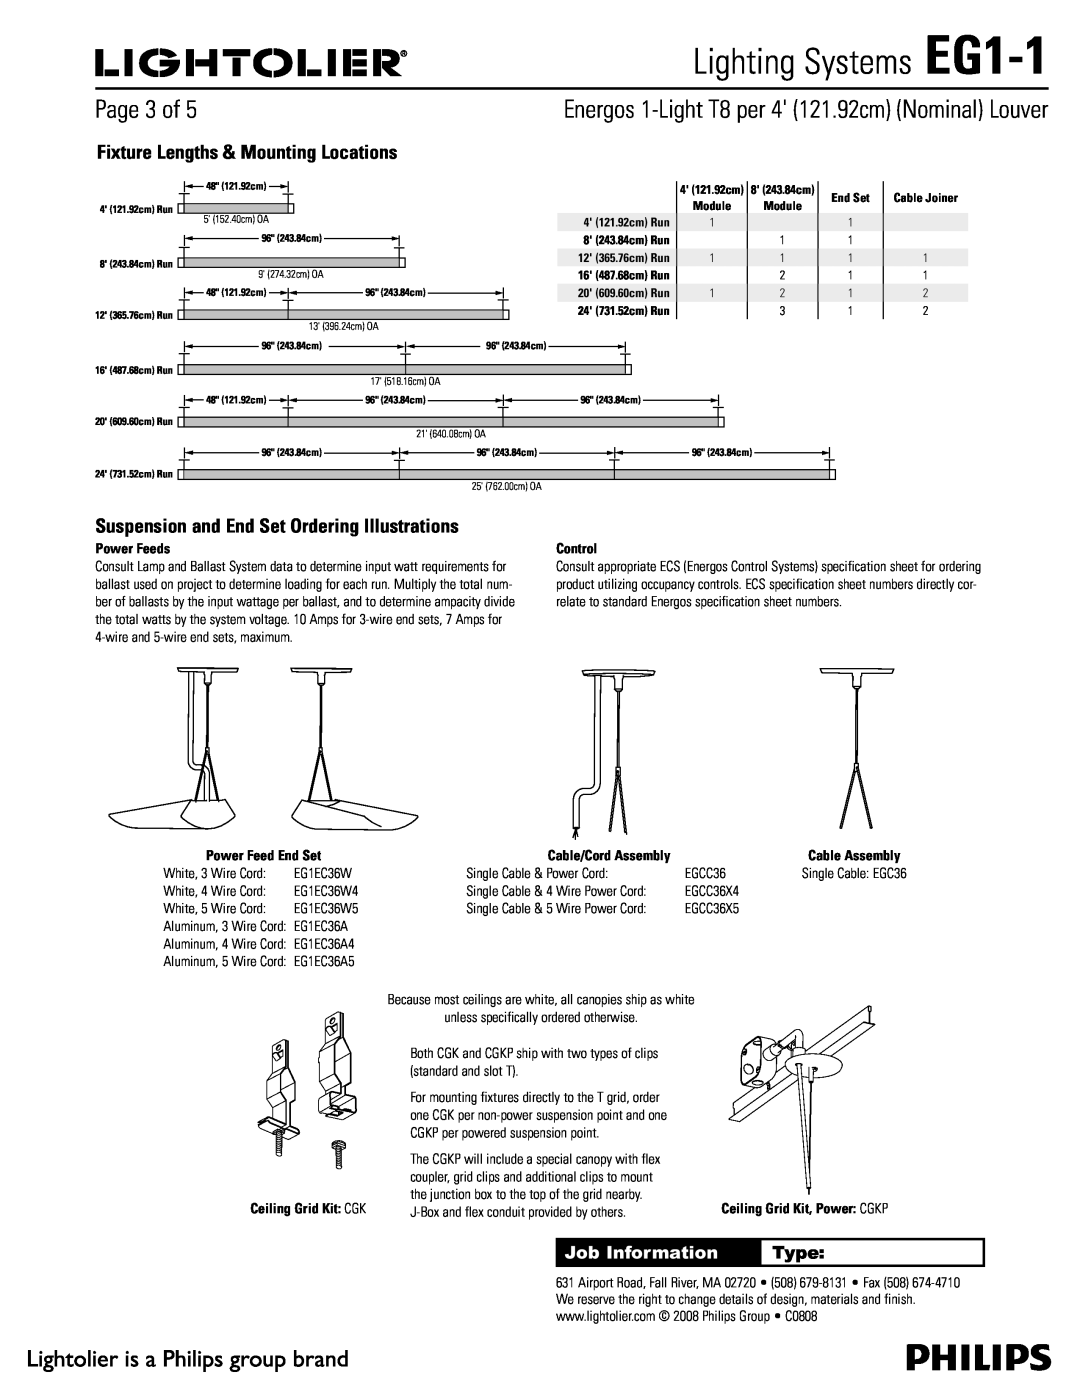 Lightolier EG1-1 1BHFPG, Fixture Lengths & Mounting Locations, Suspension and End Set Ordering Illustrations, Type 